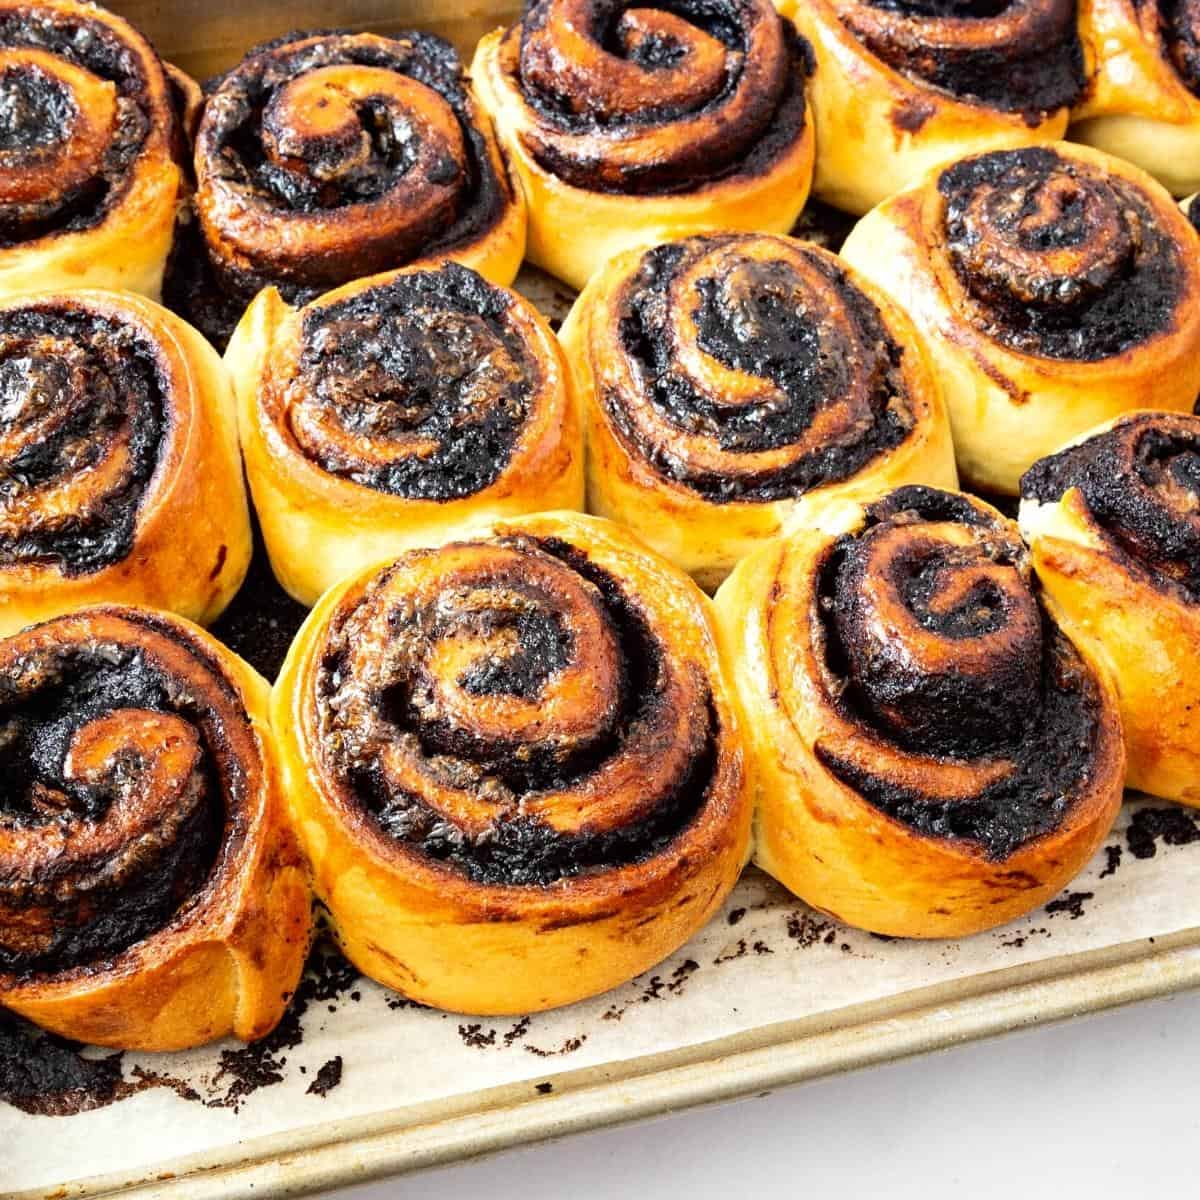 A baking tray with baked cinnamon rolls.